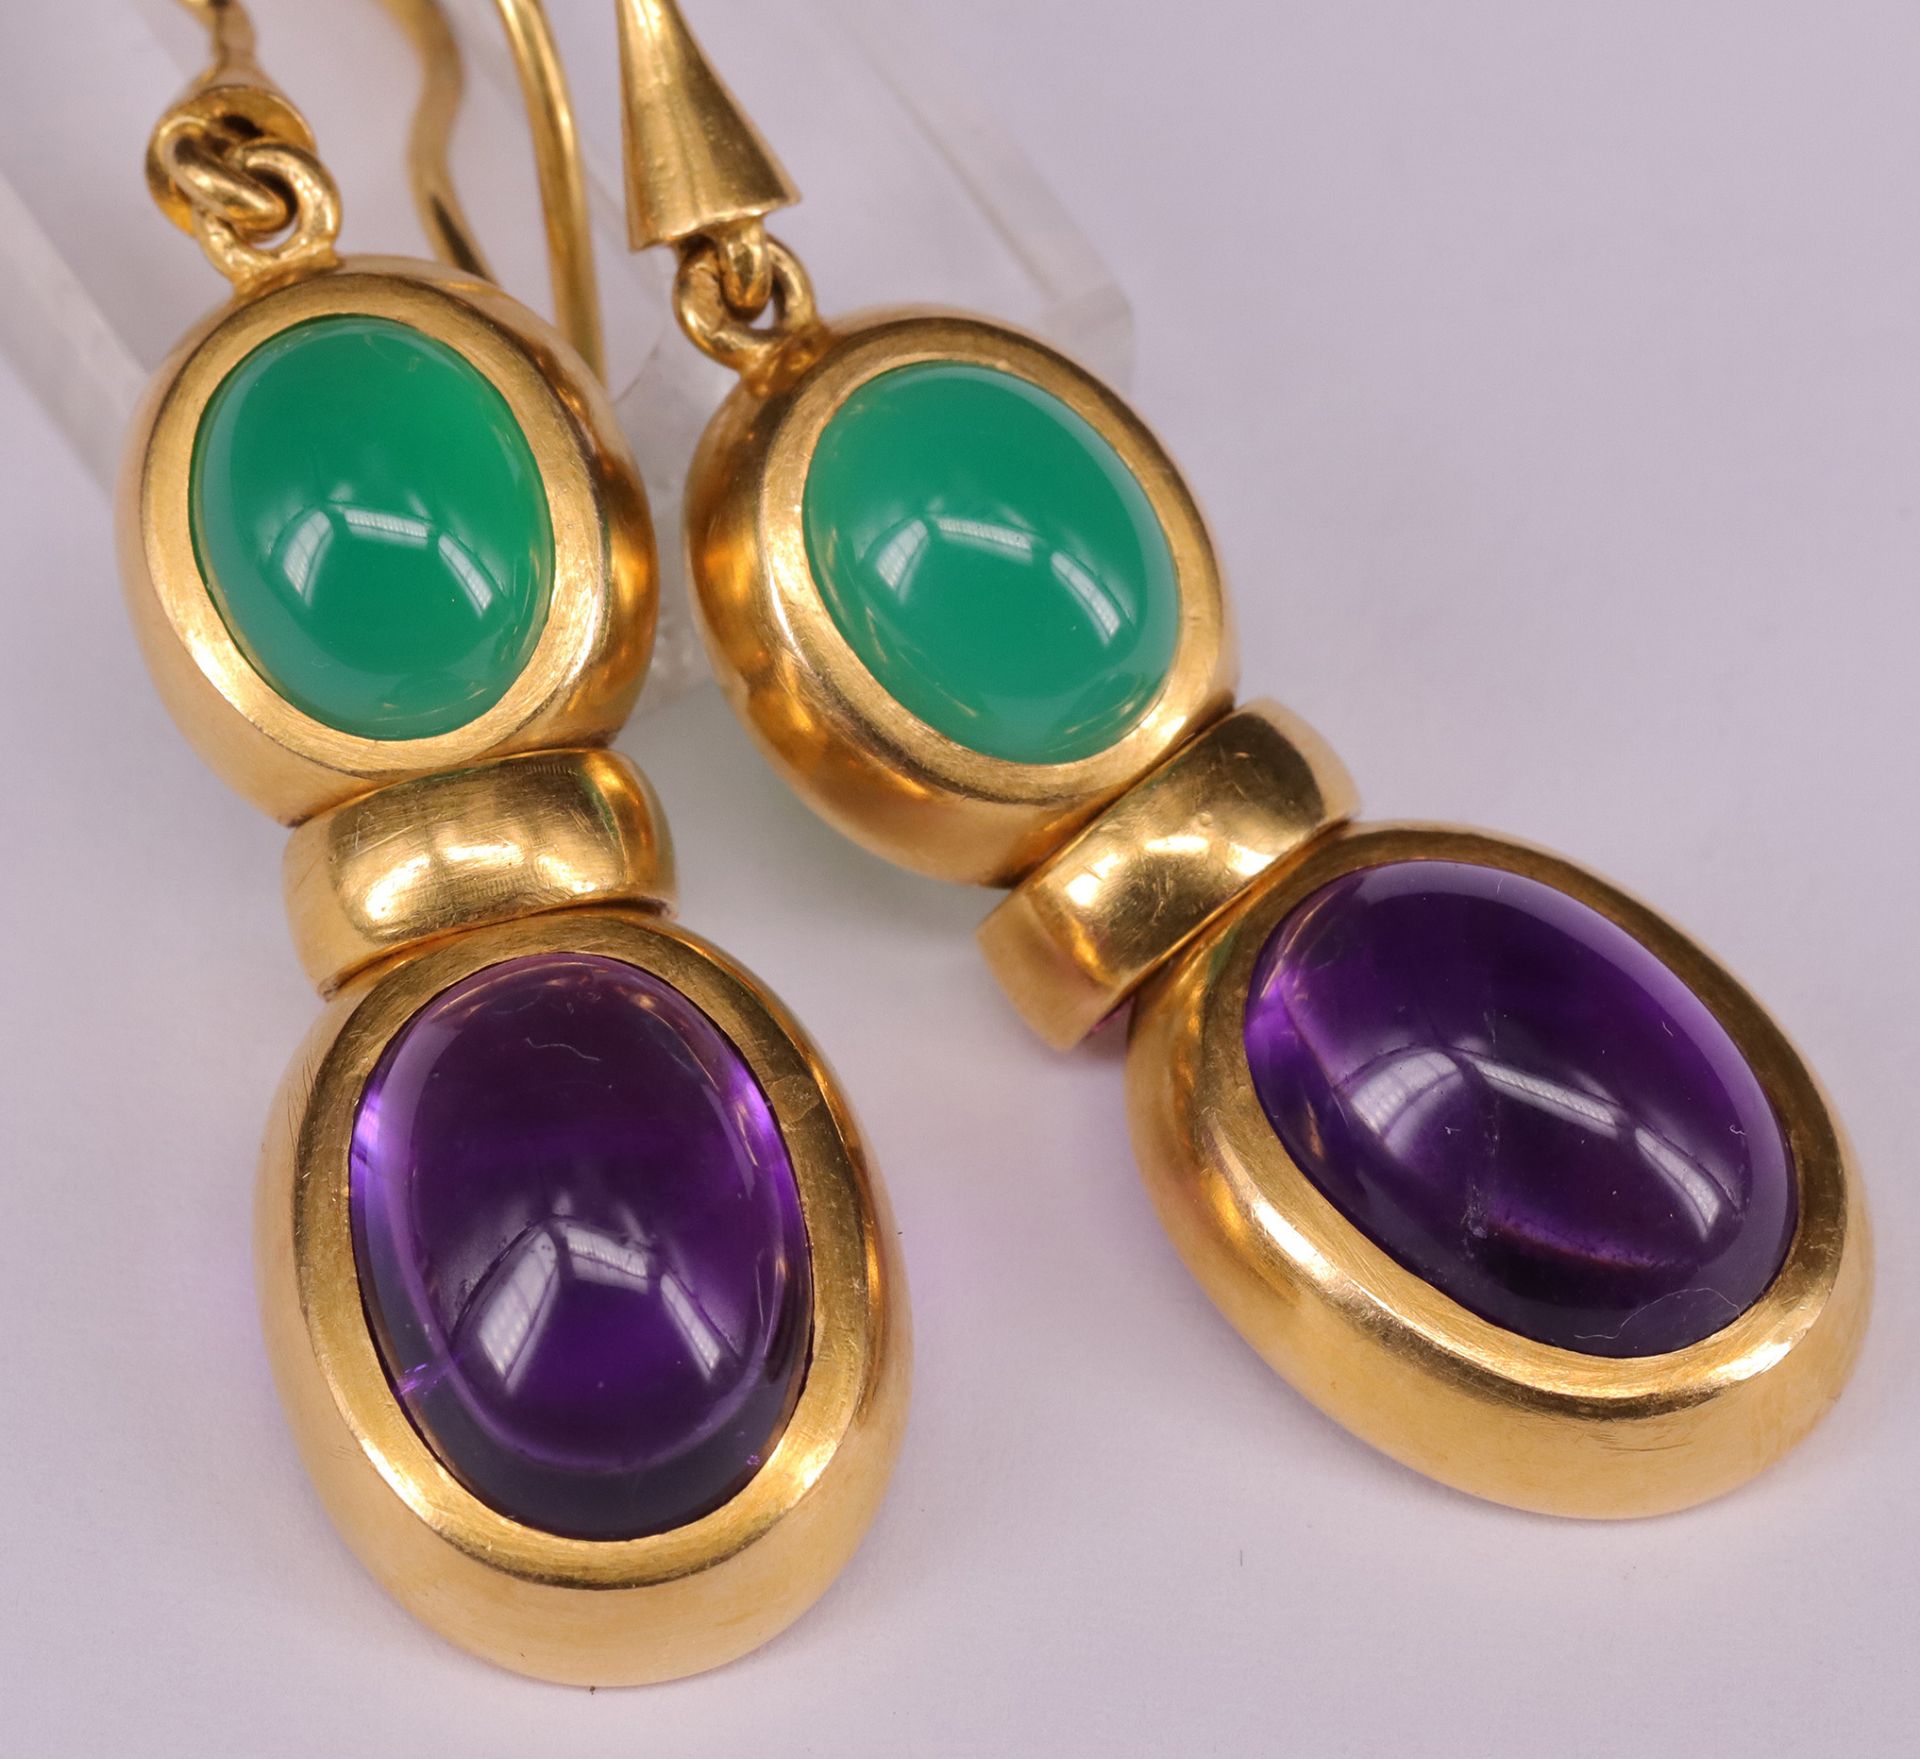 Paar Ohrhänger / pair of earrings. 750er GG, mit Amethyst und Chrysopal (?) Cabochons, L. 5,2 cm - Image 3 of 3